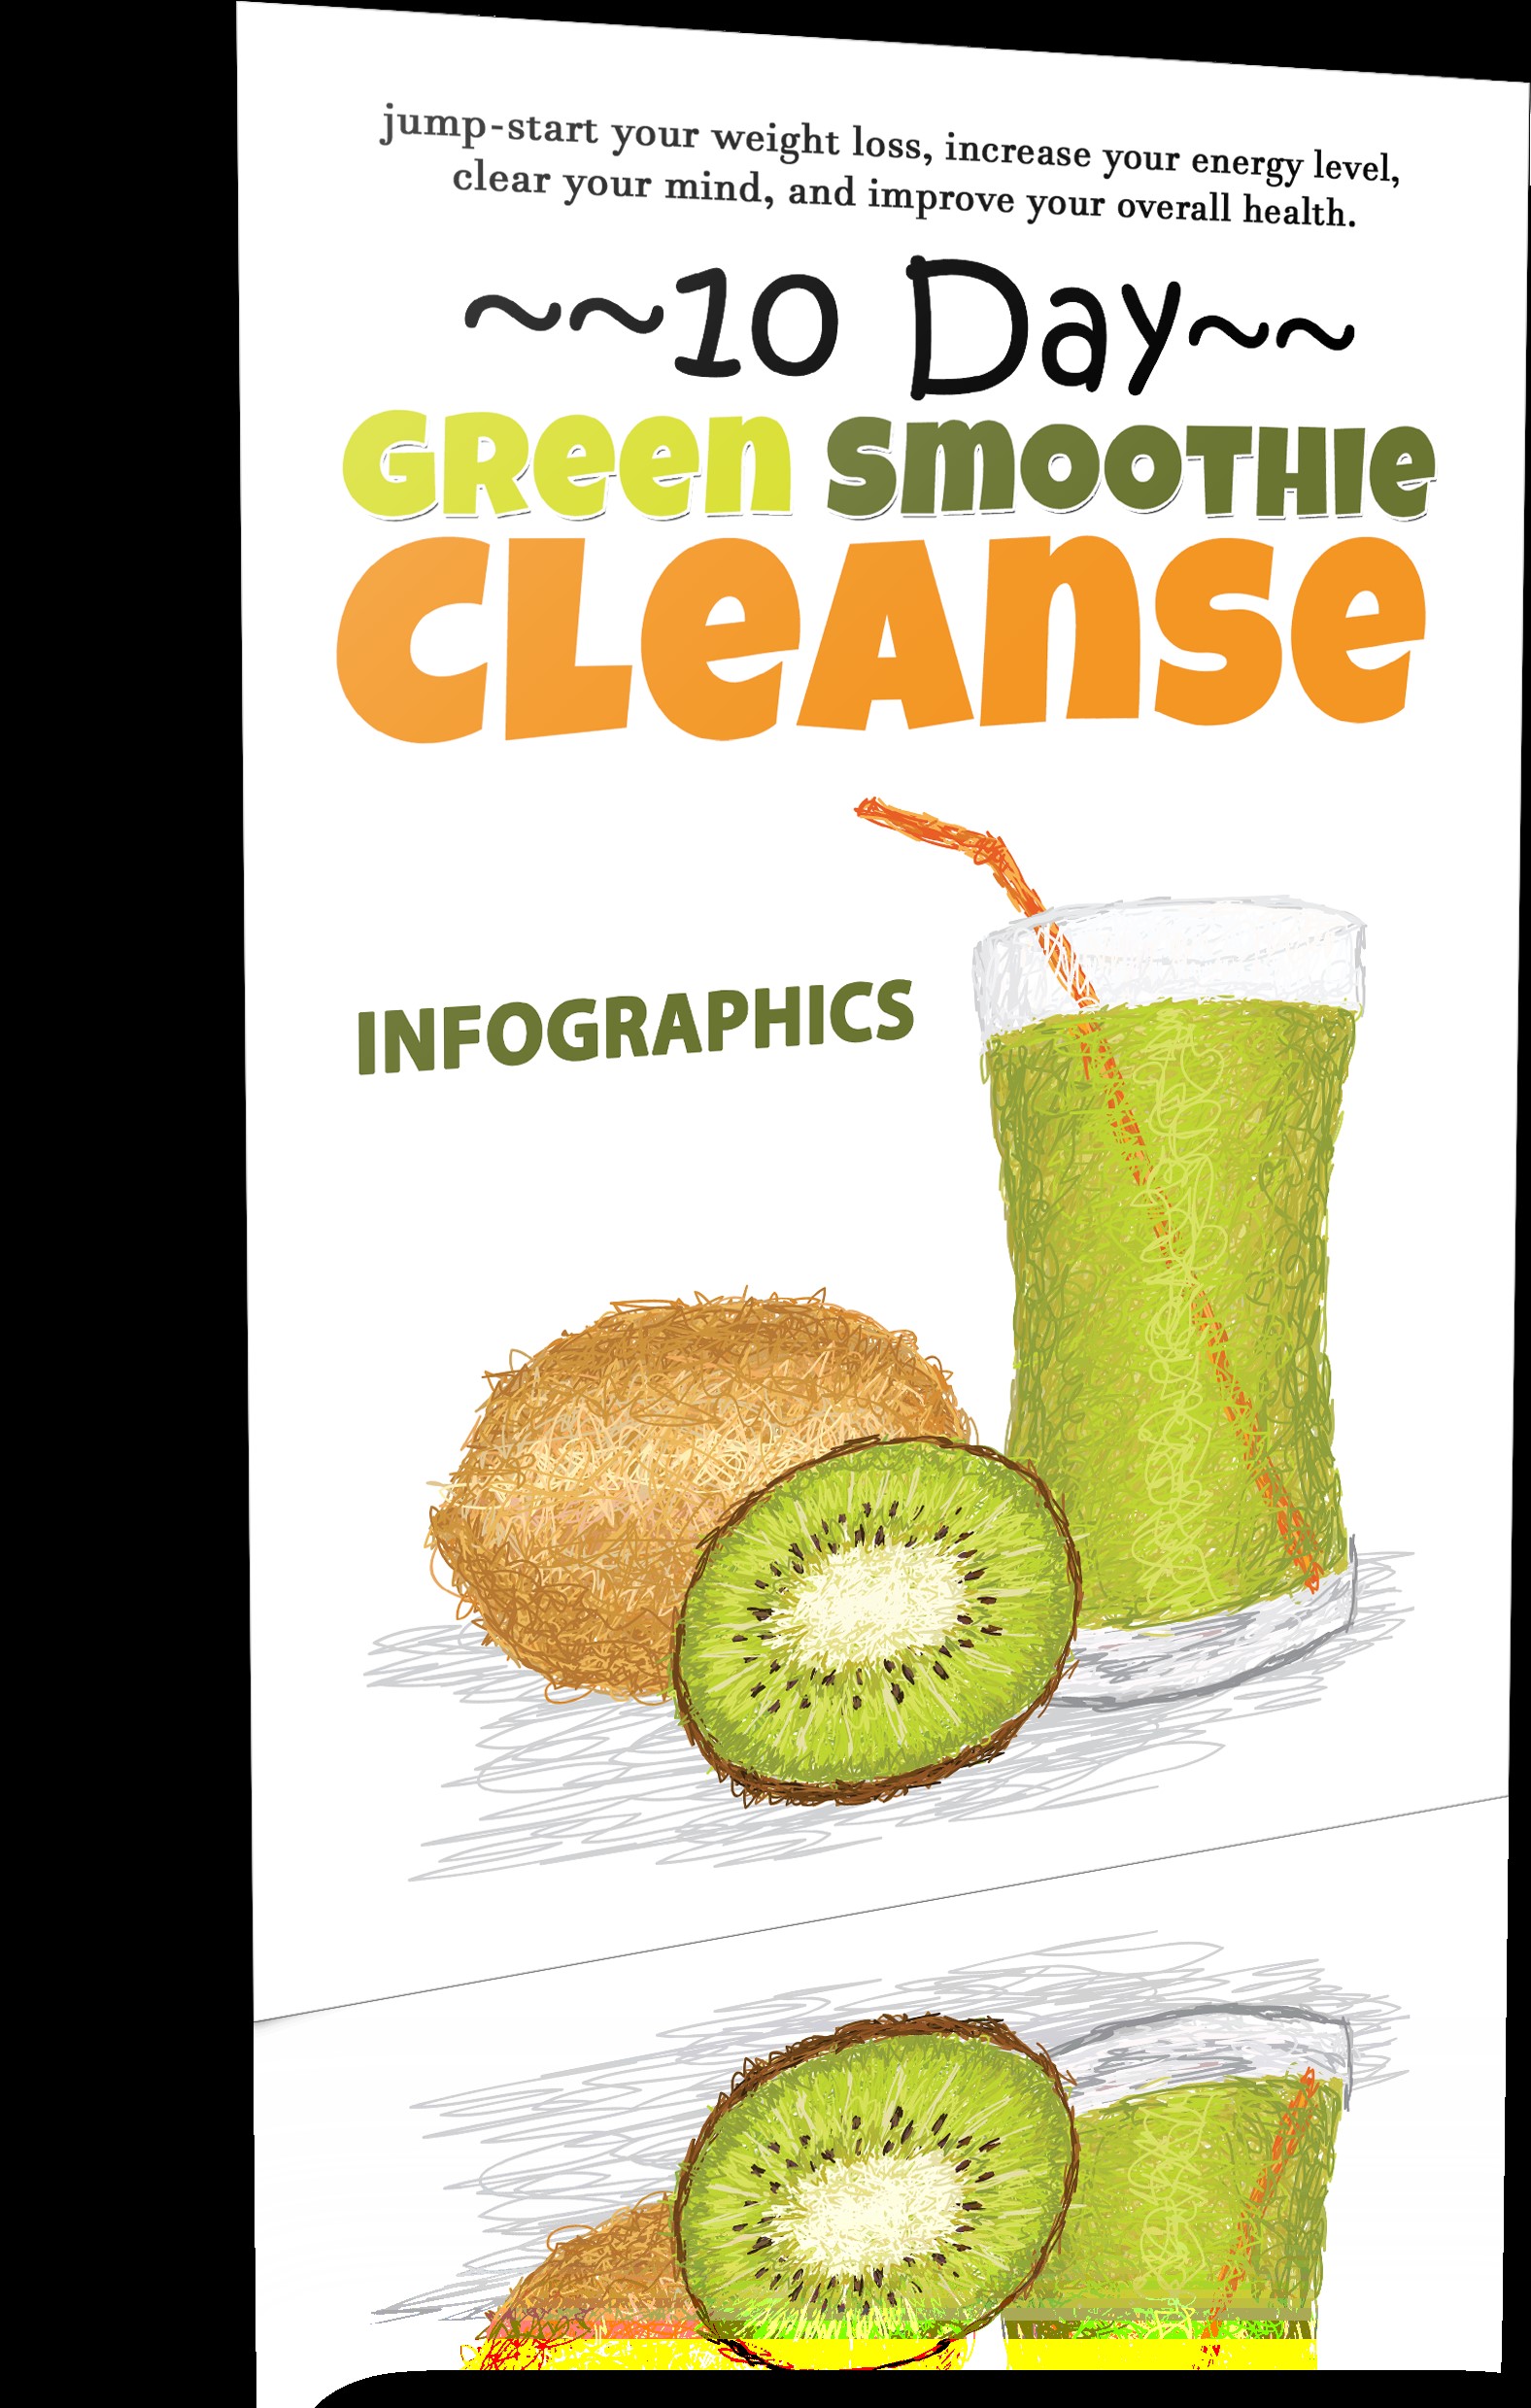 Green Smoothie Cleanse infographic